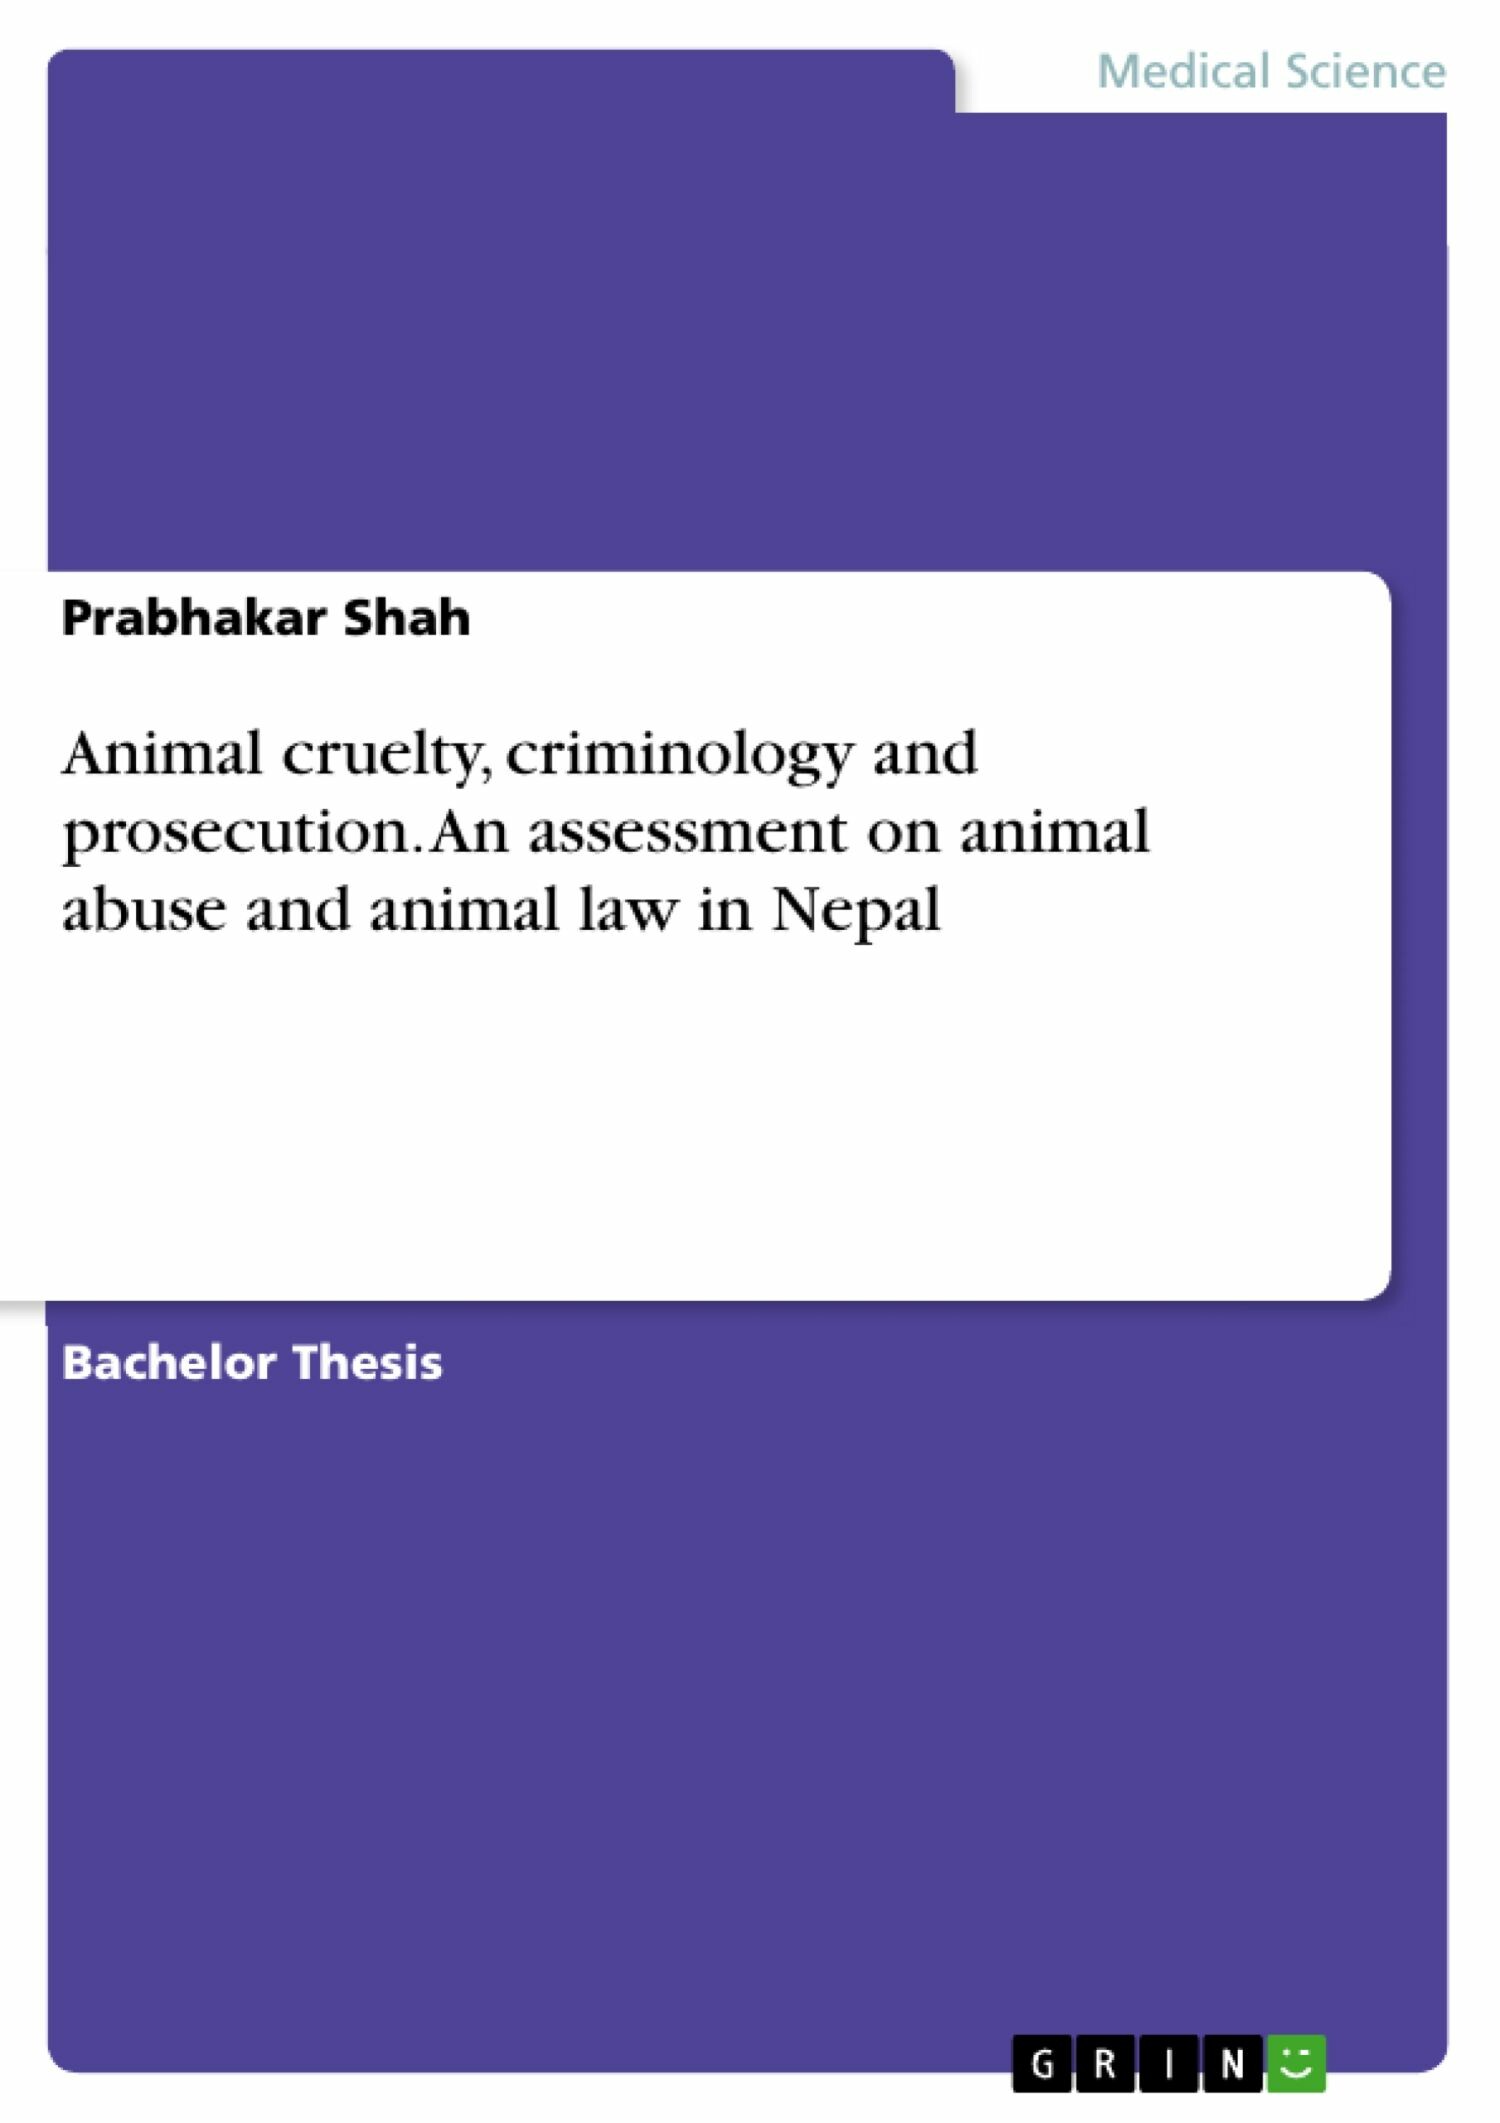 Animal cruelty, criminology and prosecution. An assessment on animal abuse and animal law in Nepal